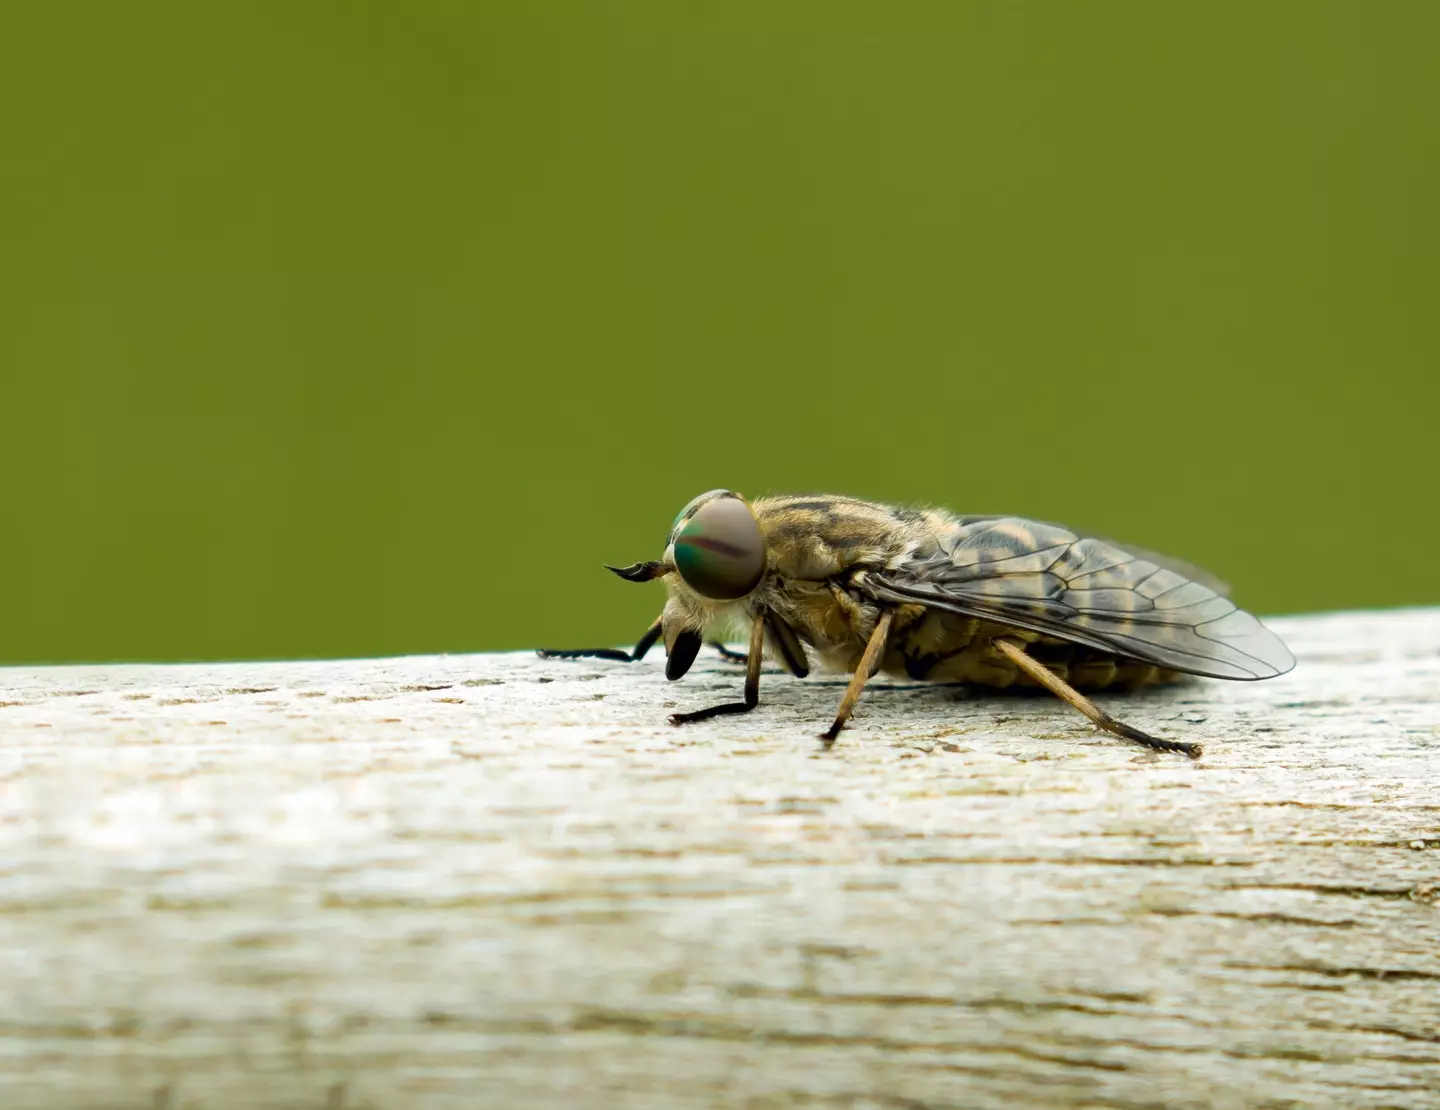 Horseflies are an absolute menace, they can bite through clothes and deliver a painful chomp.